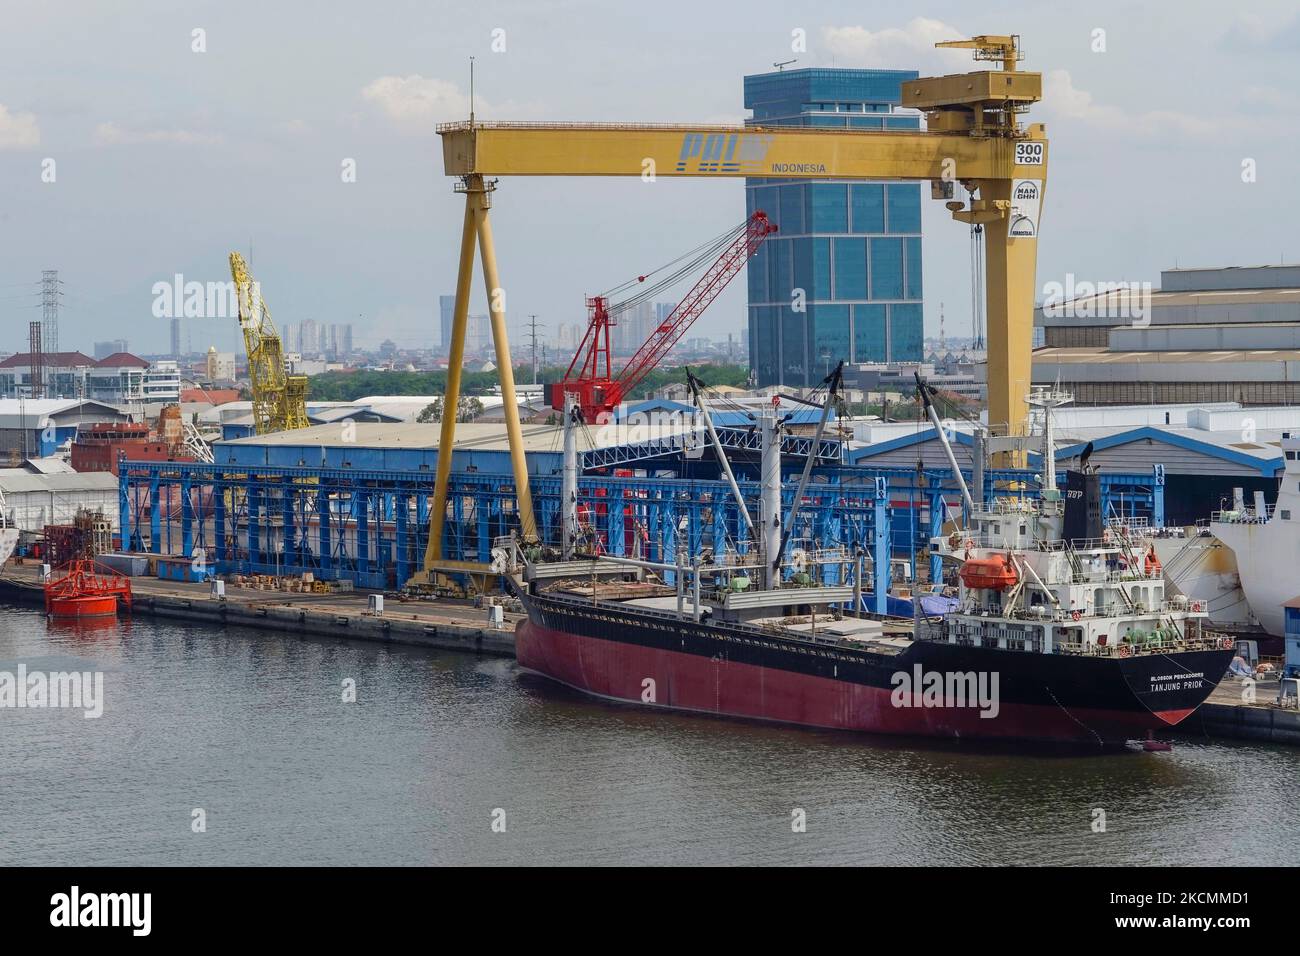 Industrial tanker ship docked and under repair in PAL Surabaya, Indonesia on August 2022 Stock Photo